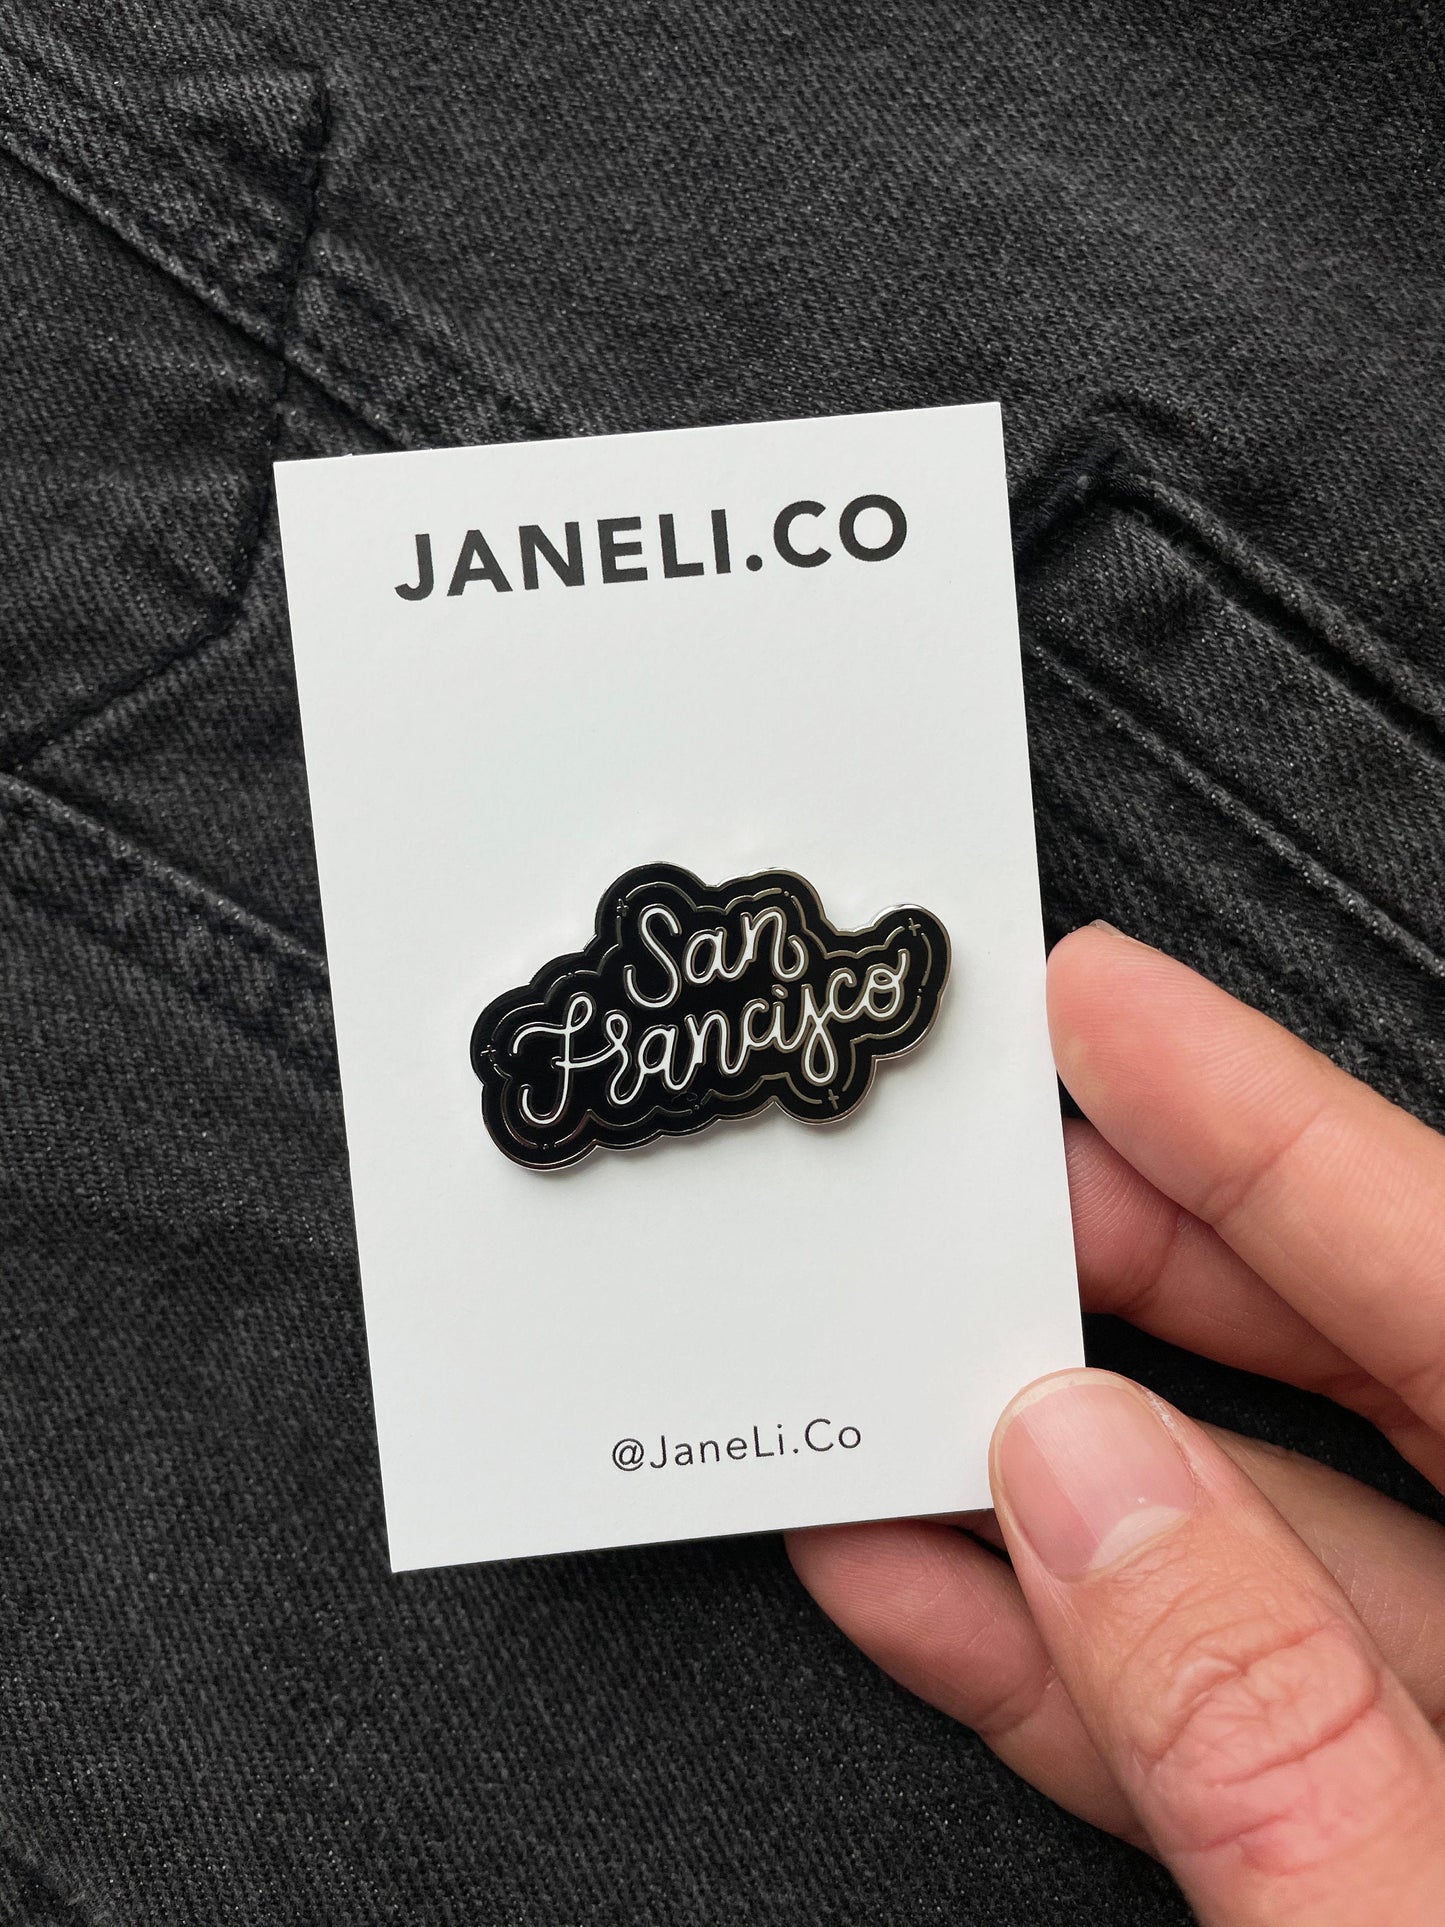 A hand holding a black, white, and silver enamel pin that says "San Francisco" over a black denim jacket.